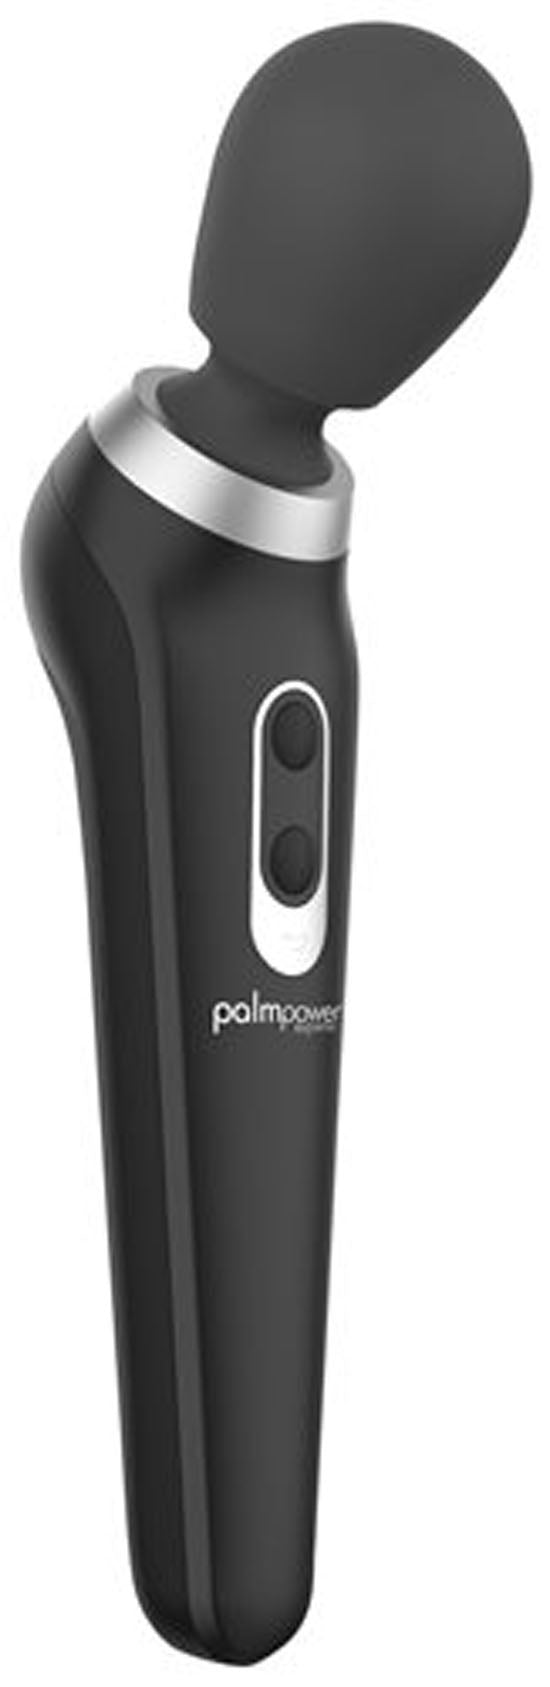 Palmpower Extreme - Black BMS30911